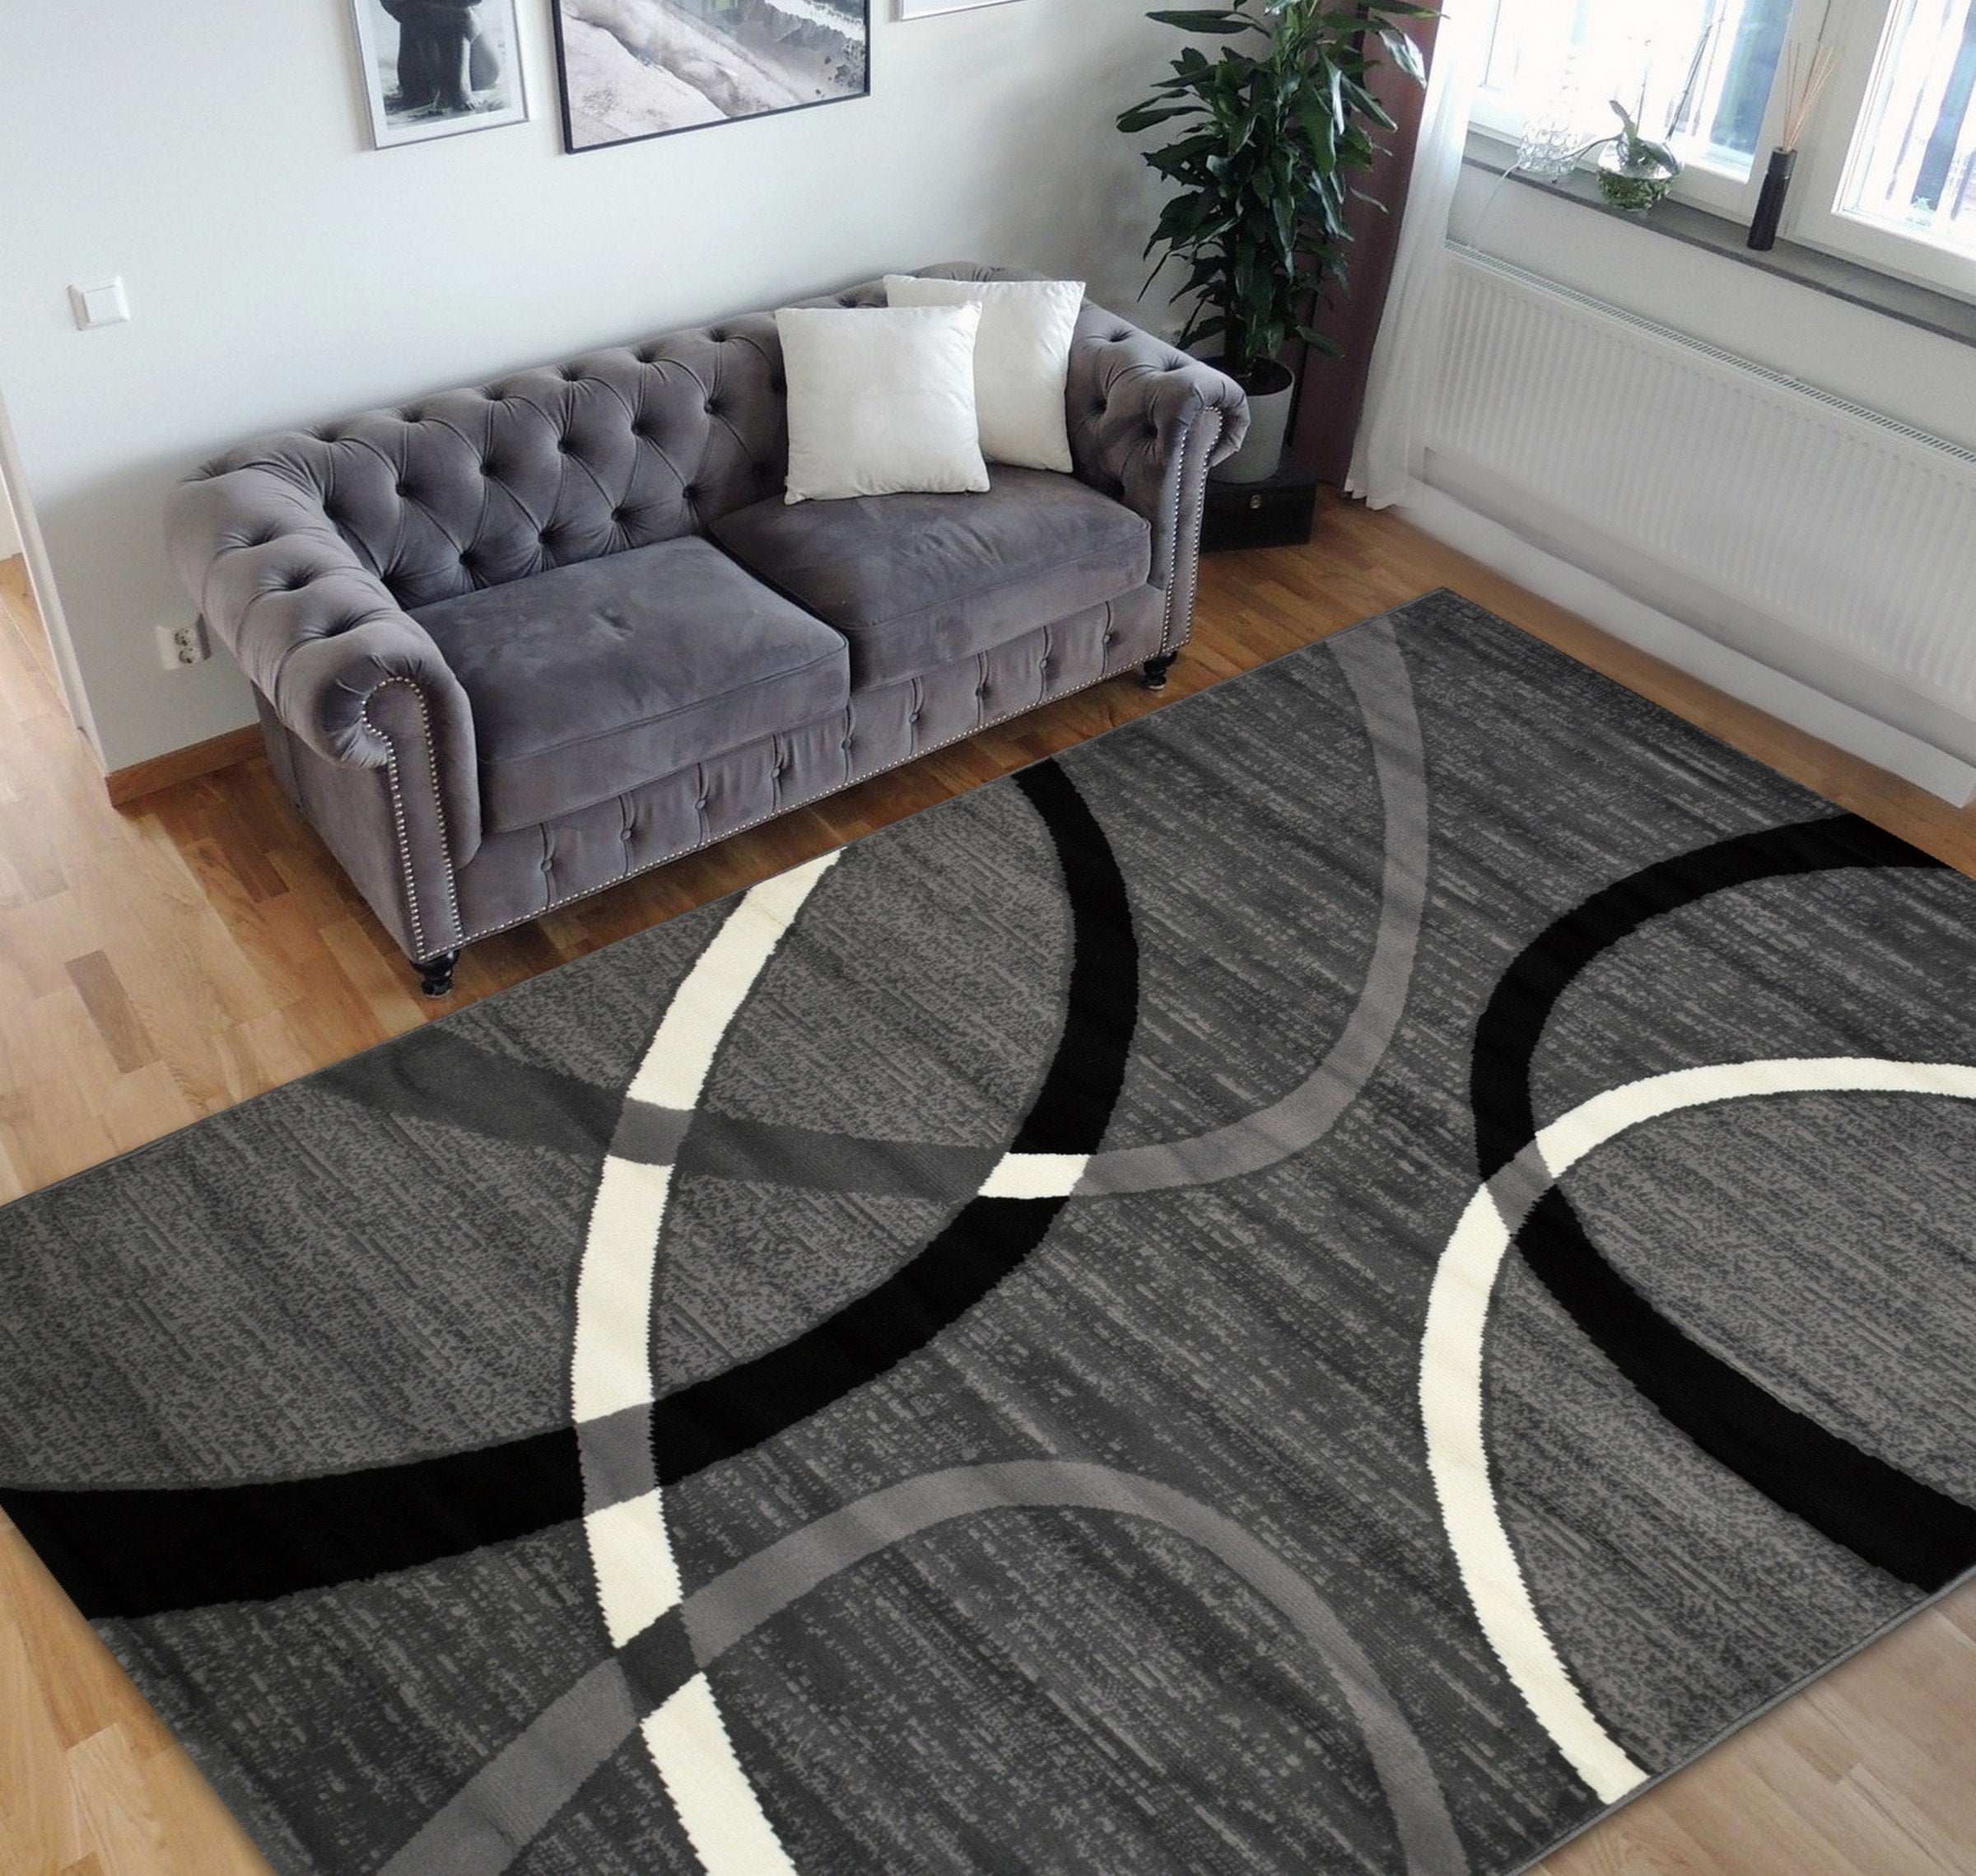 ALAZA Chalkboard with Scientific Formula Physics Area Rug Rugs for Living Room Bedroom 7' x 5'